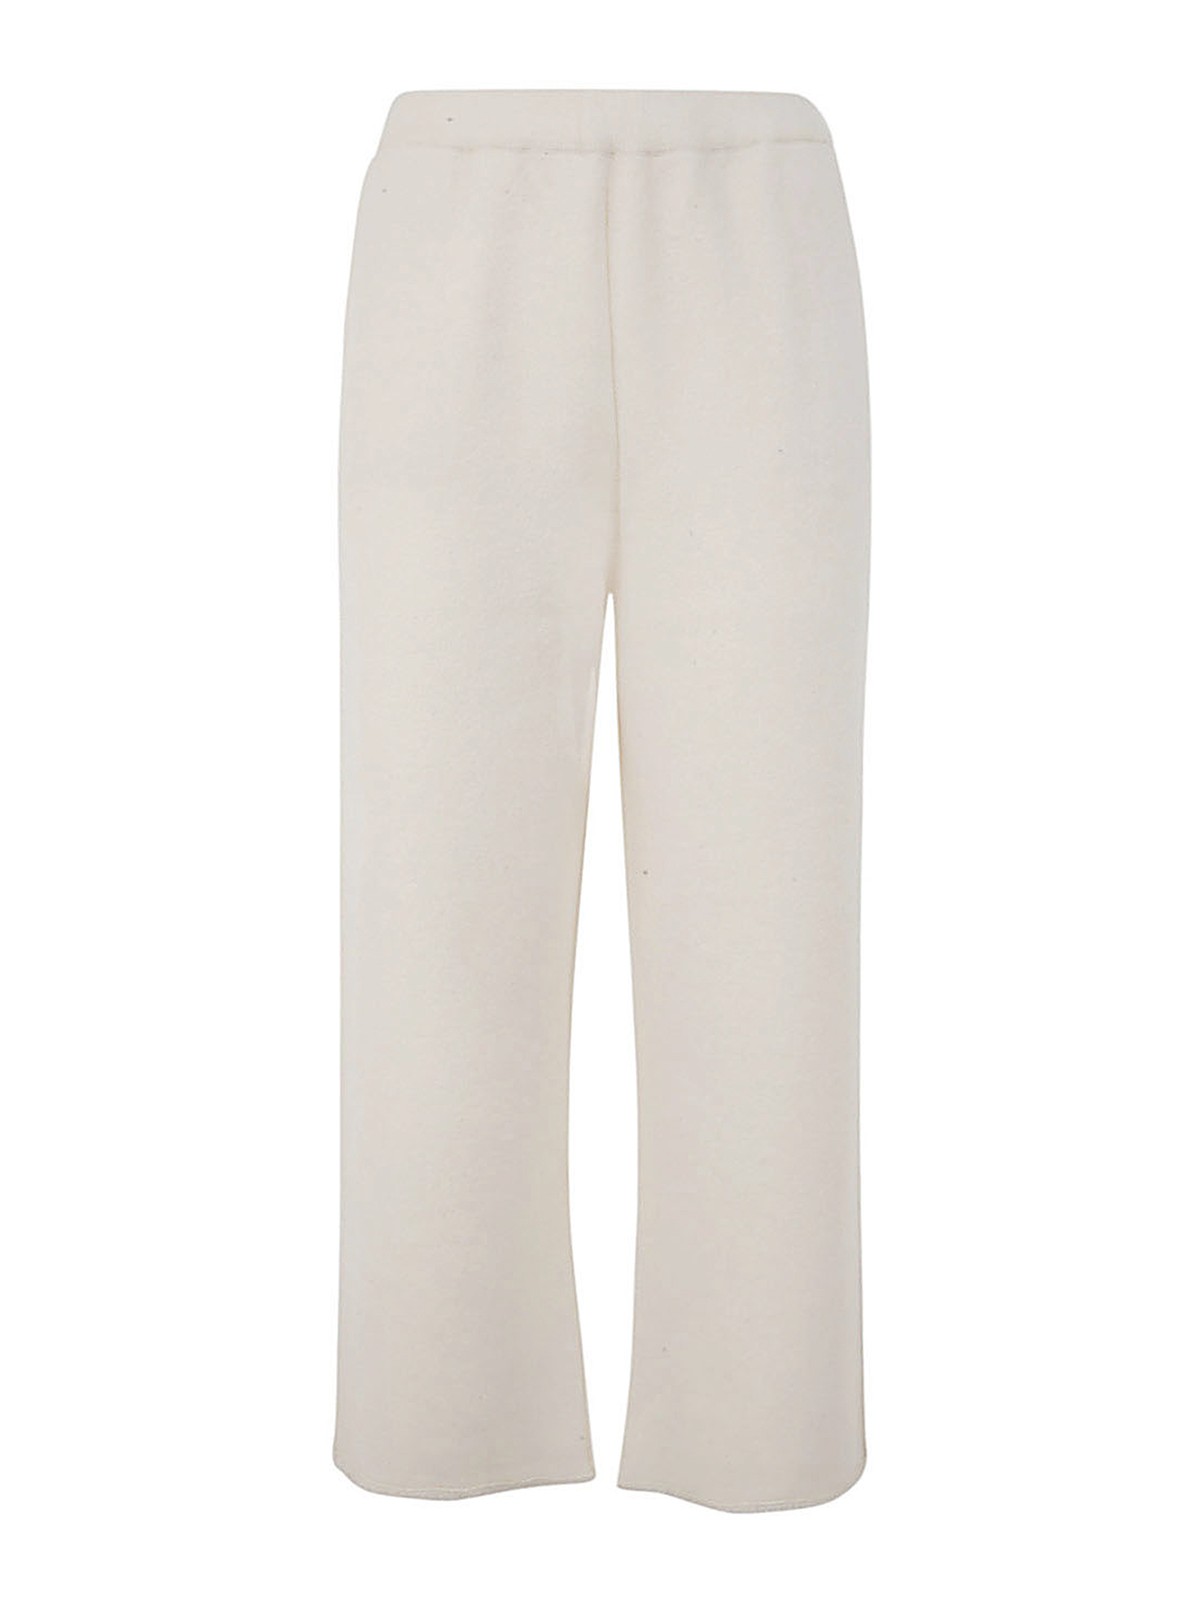 OYUNA KNITTED JACQUARD CROPPED TROUSERS